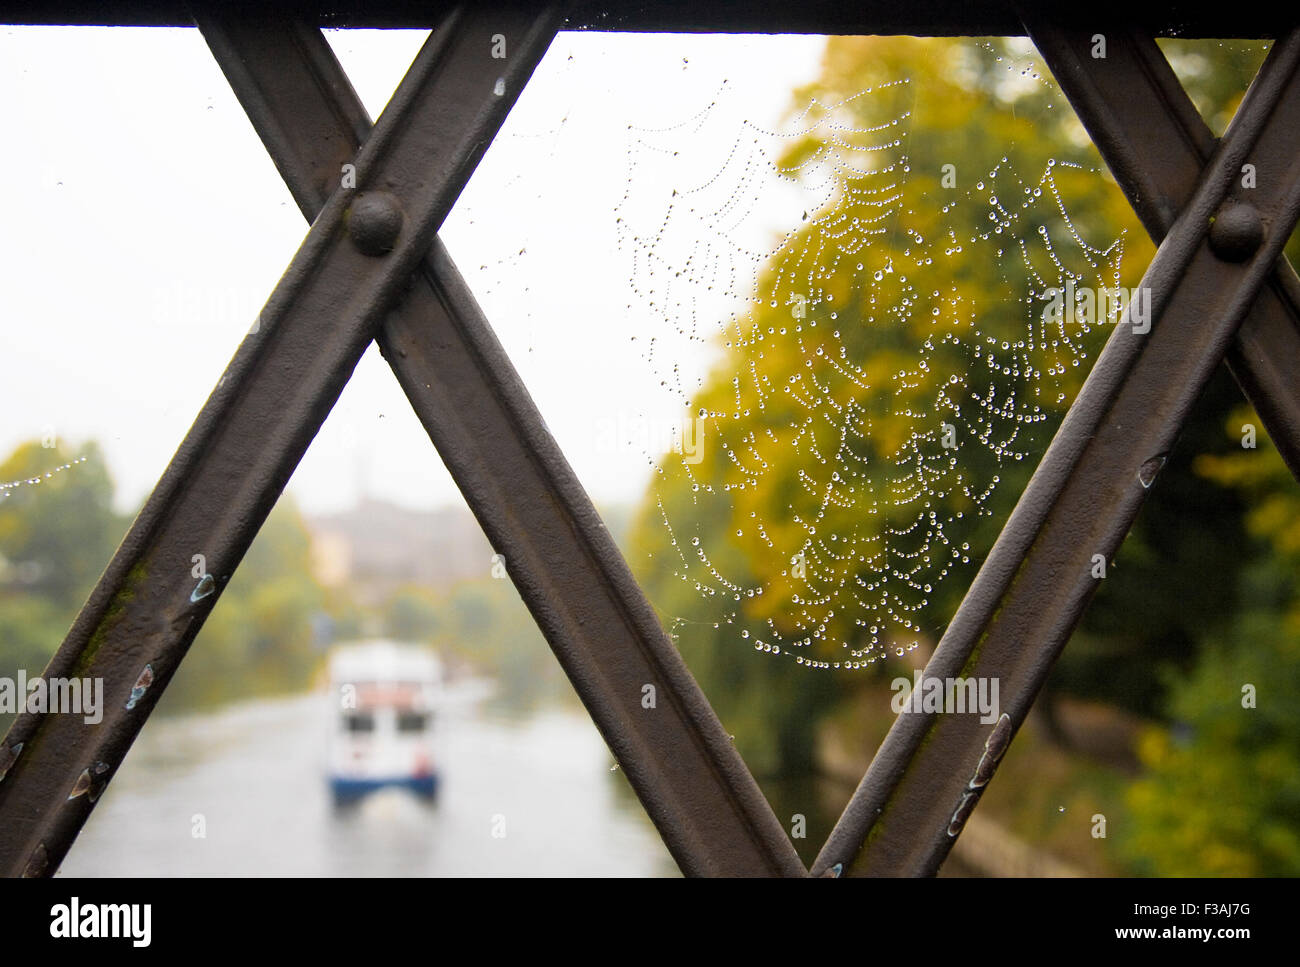 Shrewsbury, Shropshire, UK. 3rd October, 2015. The pleasure boat 'Sabrina' making one of its final trips along the River Severn in Shrewsbury, Shropshire on Saturday 3rd October, 2015. The dew on the cobweb and trees turning yellow are a sure sign that autumn is approaching. Credit:  Richard Franklin/Alamy Live News Stock Photo